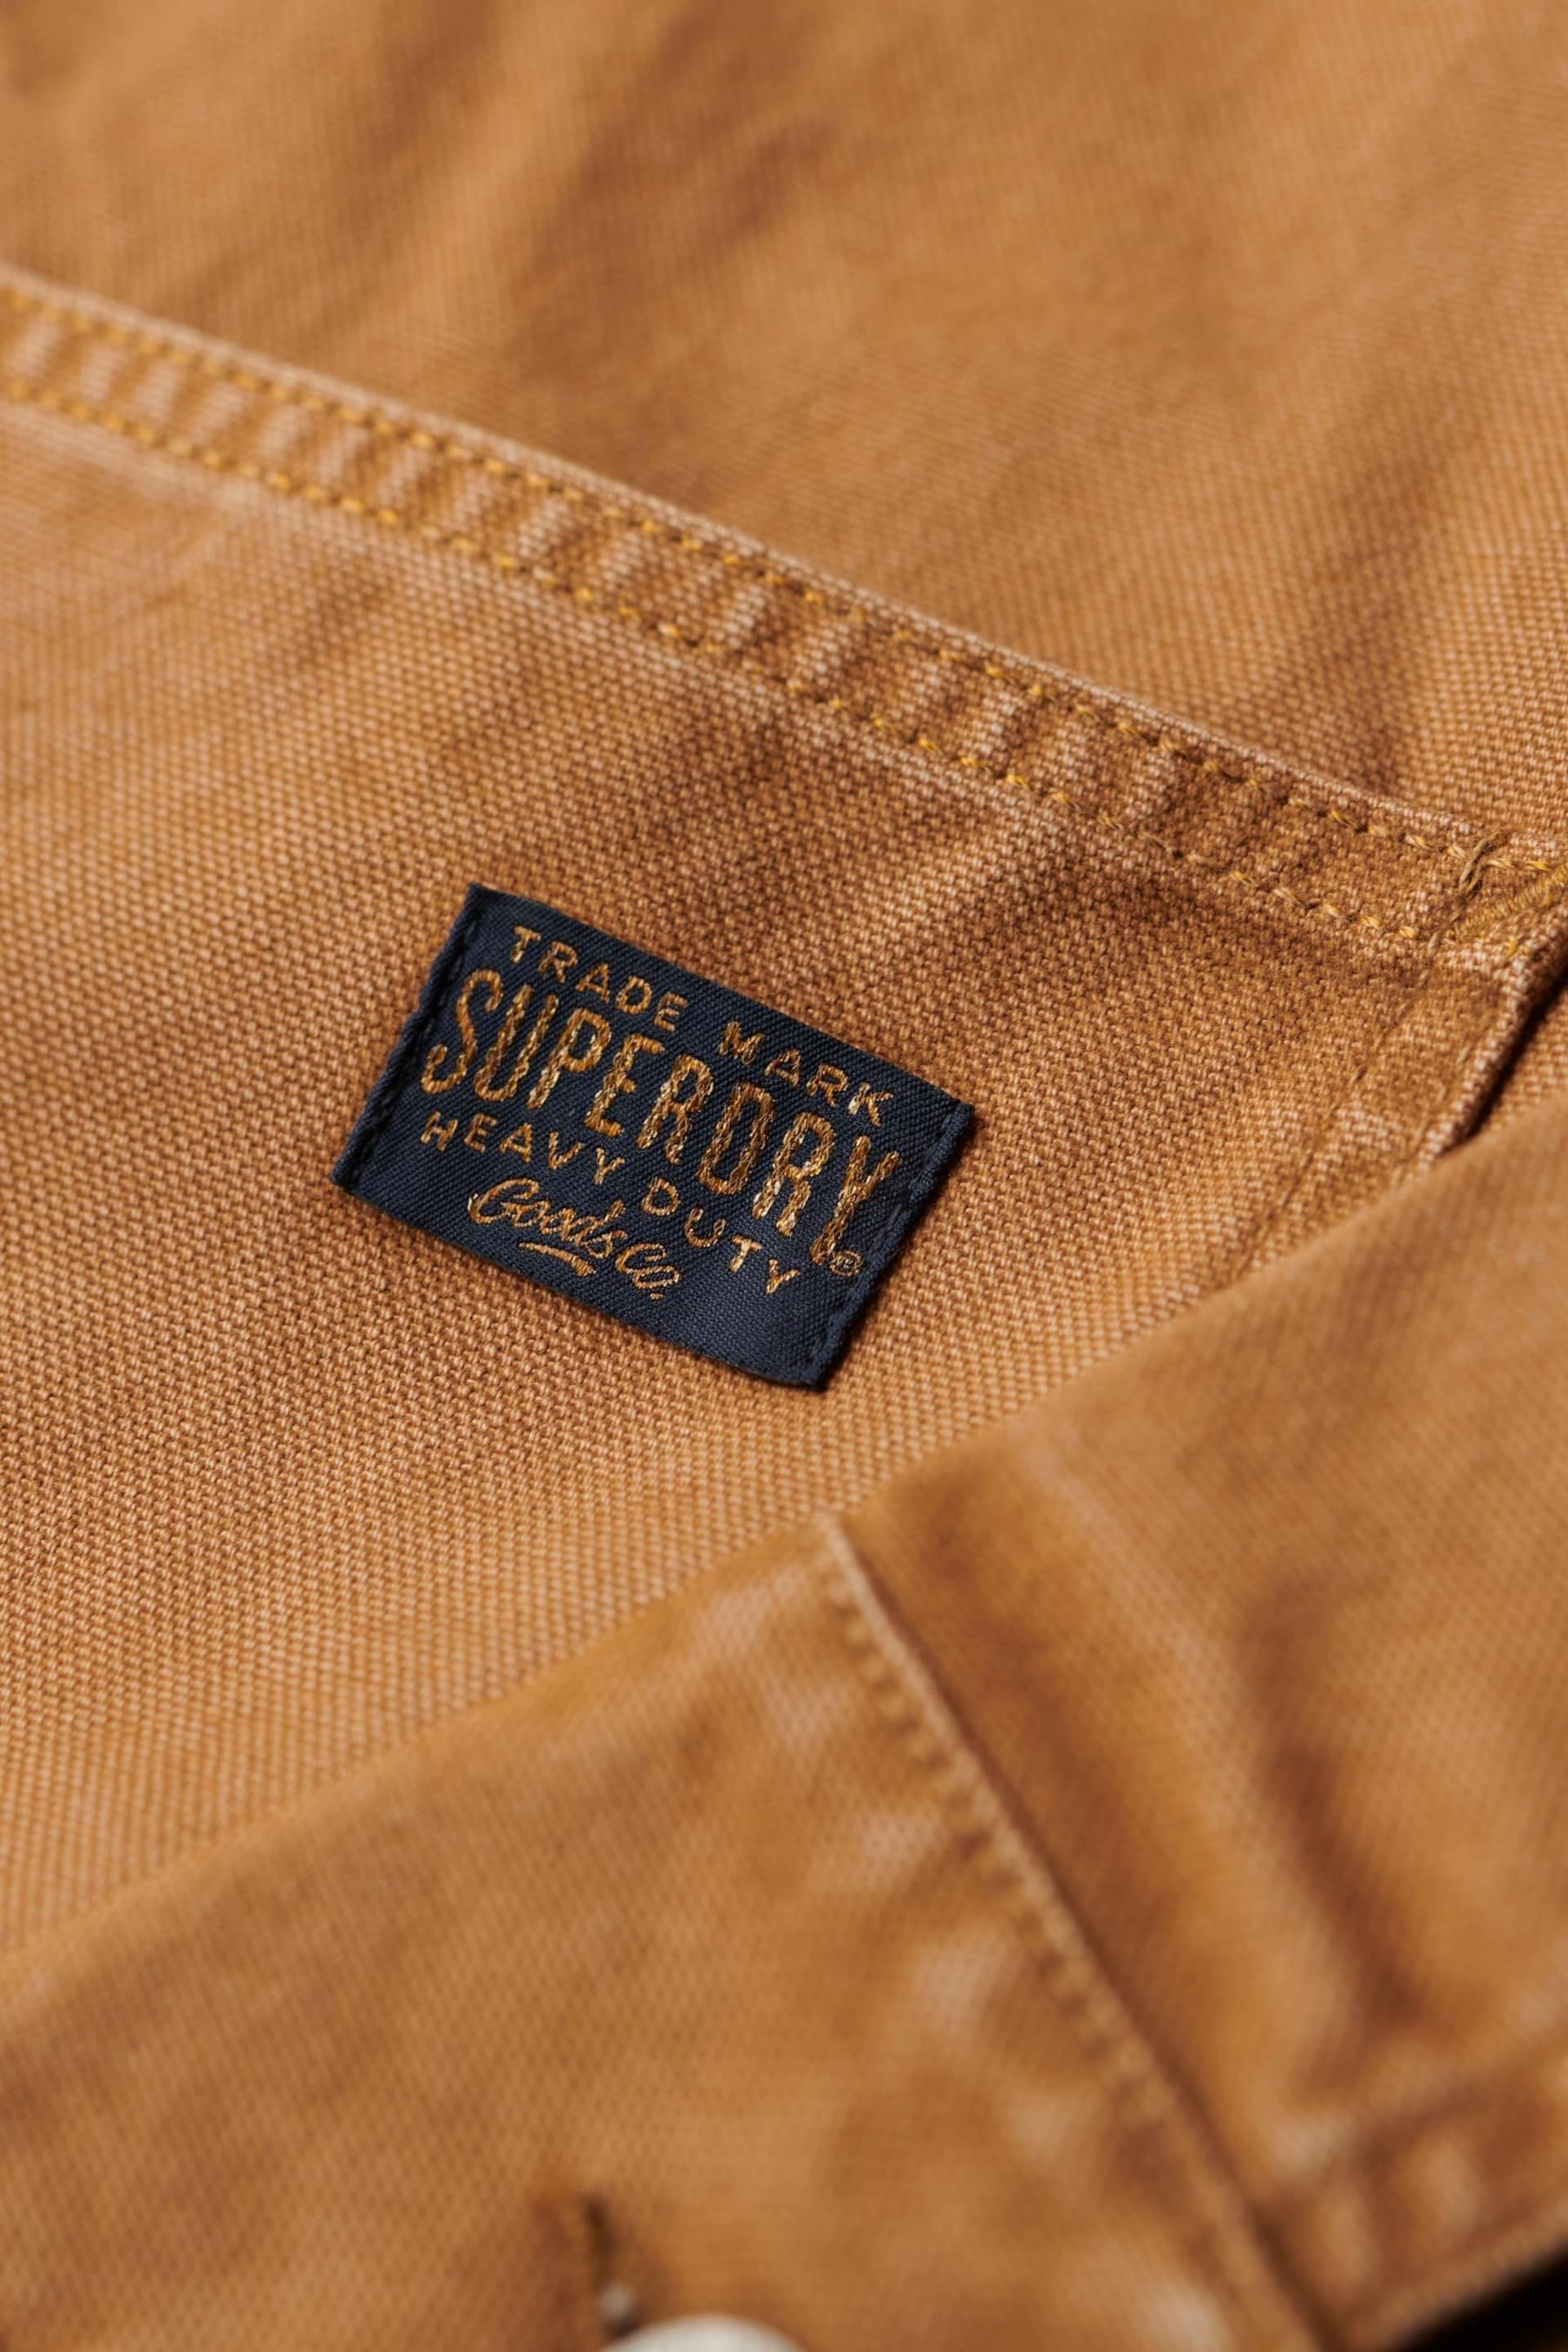 SUPERDRY Brown SUPERDRY Canvas Chore Jacket - Image 6 of 6